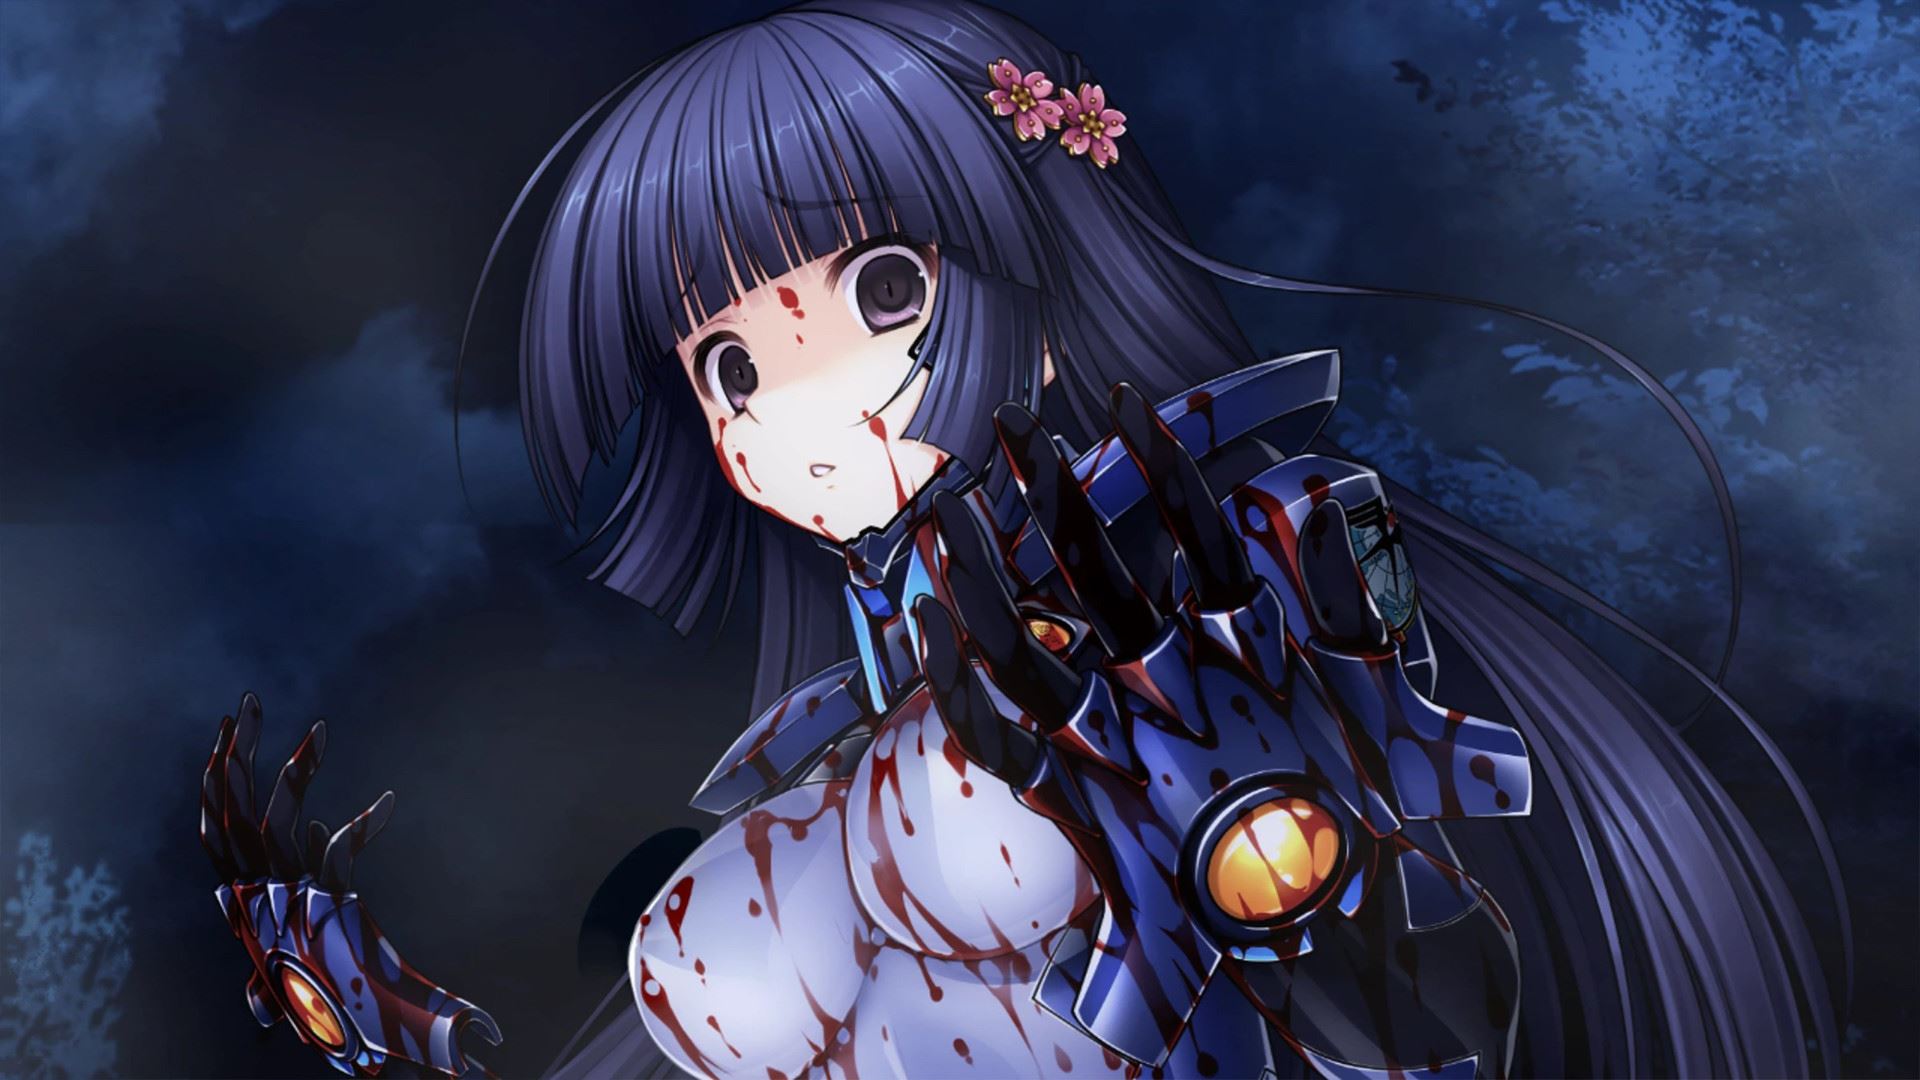 Muv-Luv Unlimited: The Day After is a sequel to Muv-Luv Unlimited. 